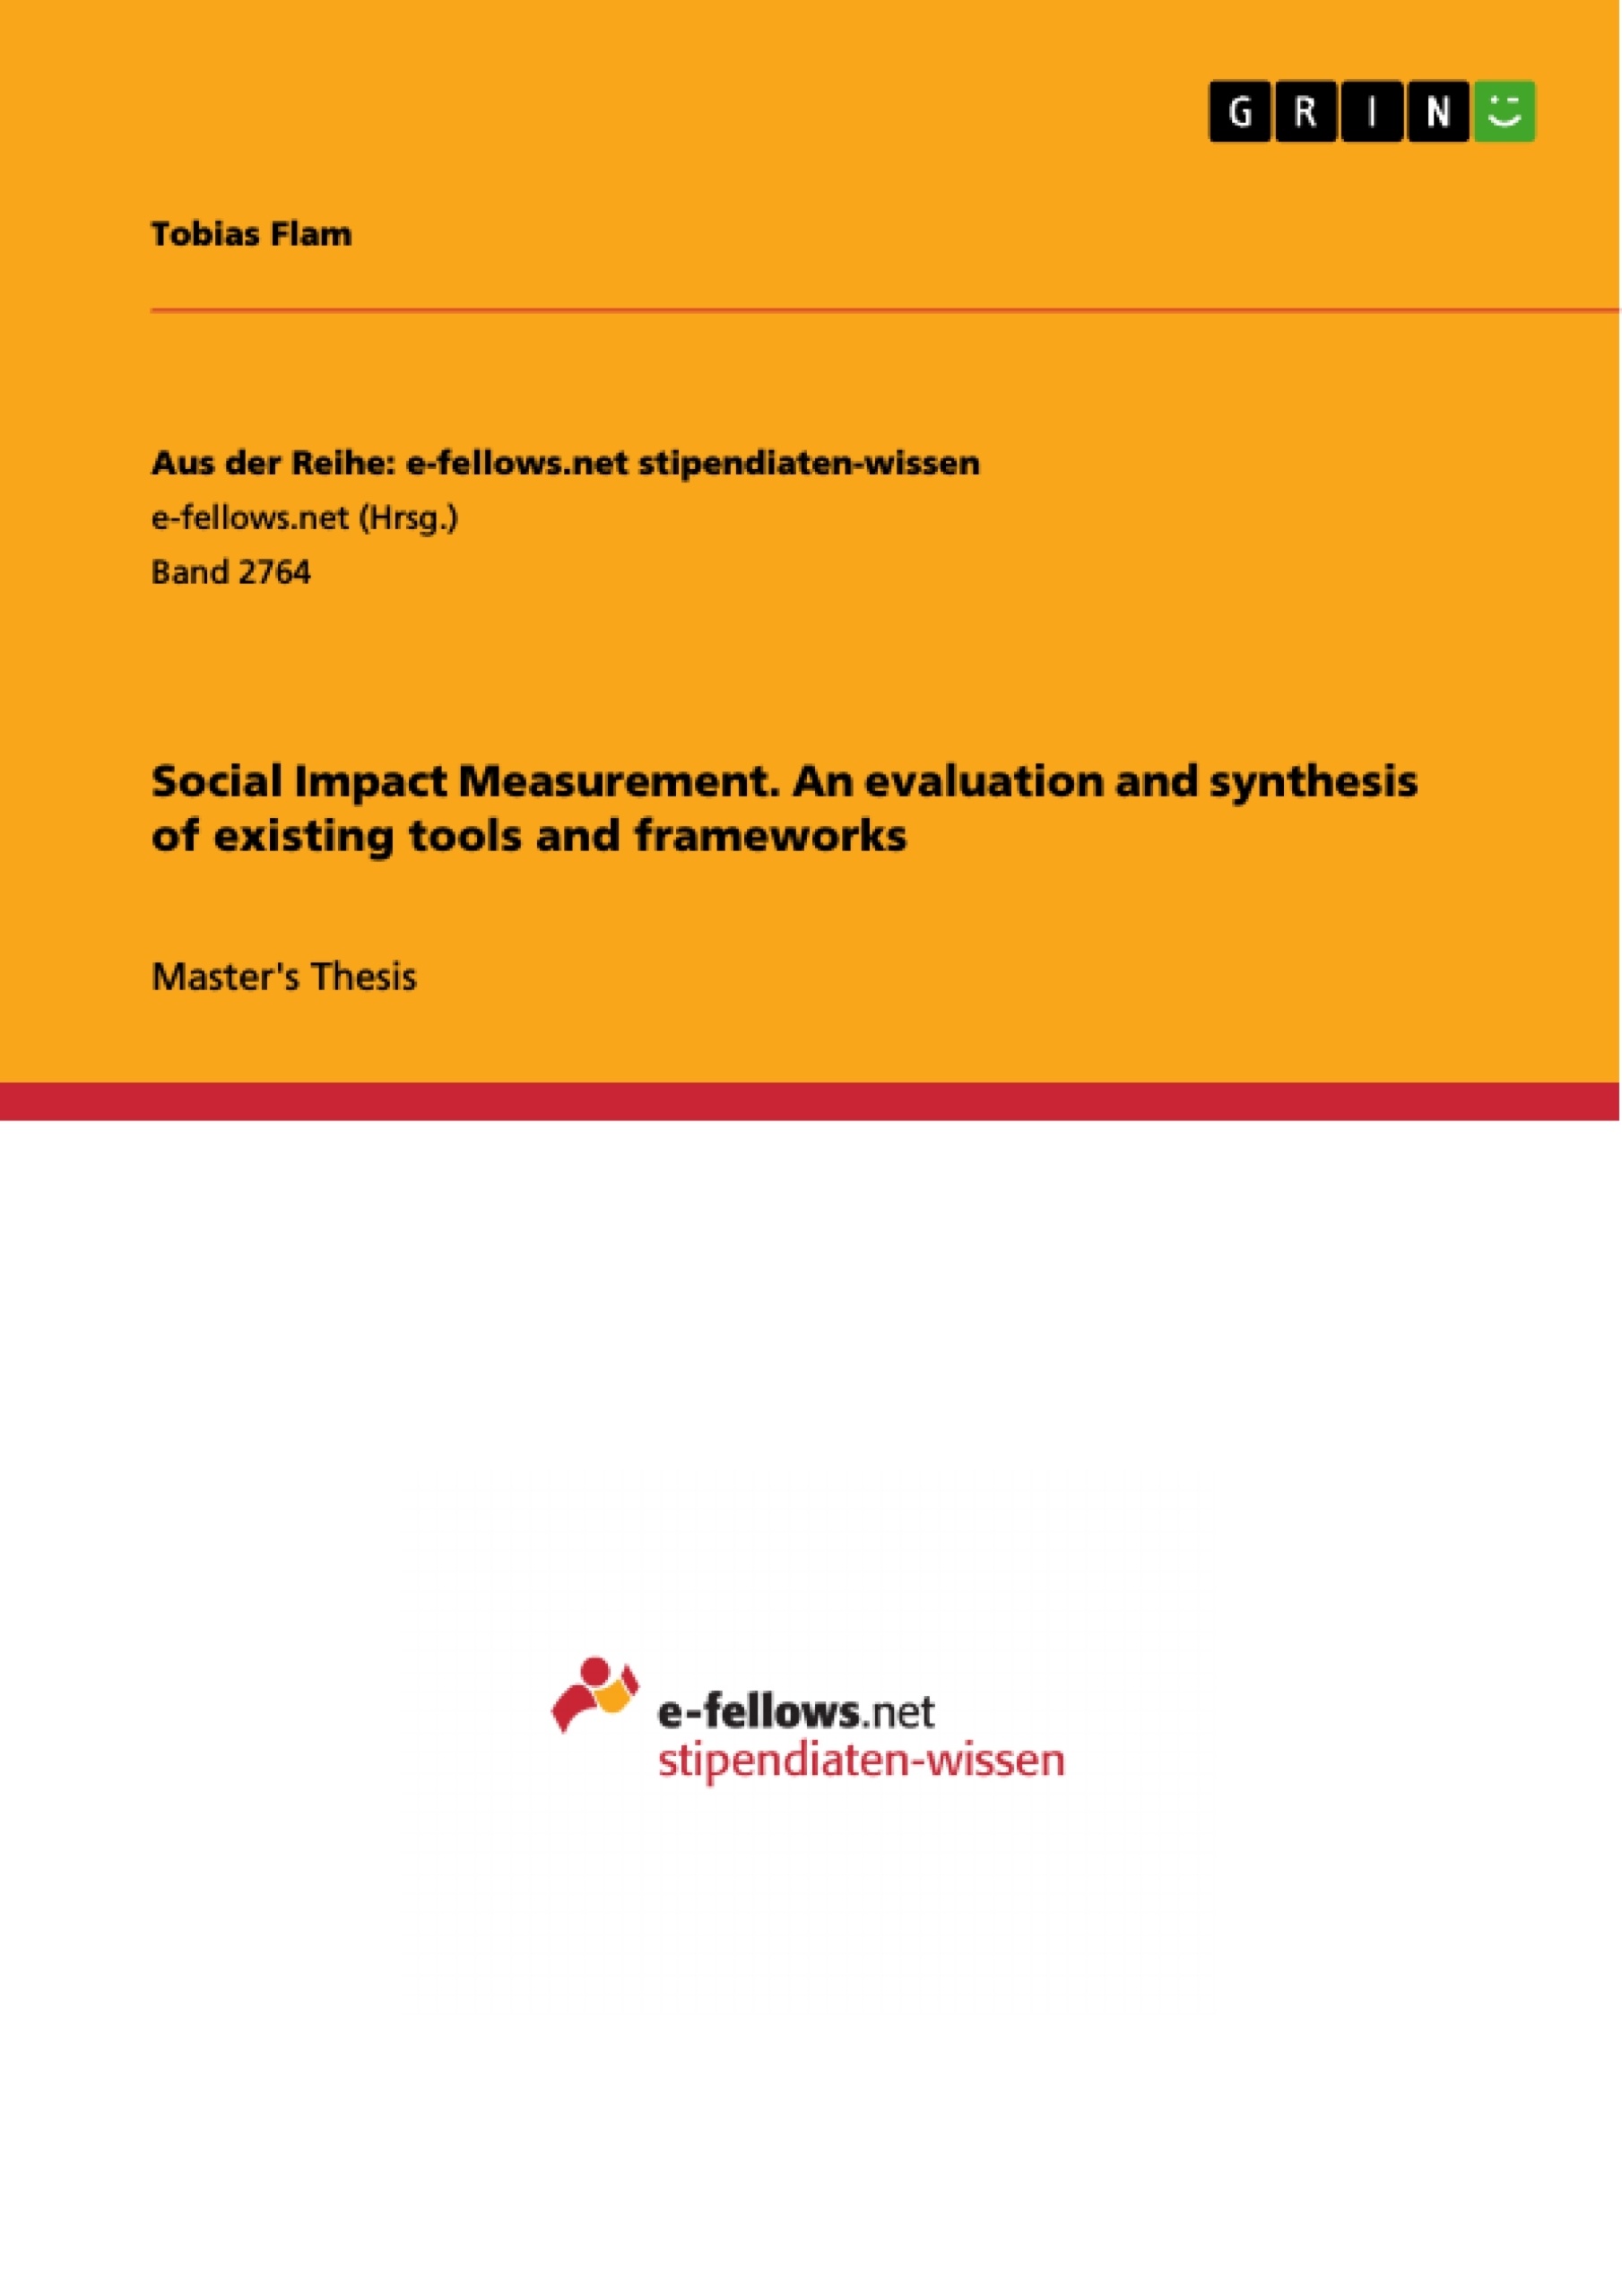 Title: Social Impact Measurement. An evaluation and synthesis of existing tools and frameworks